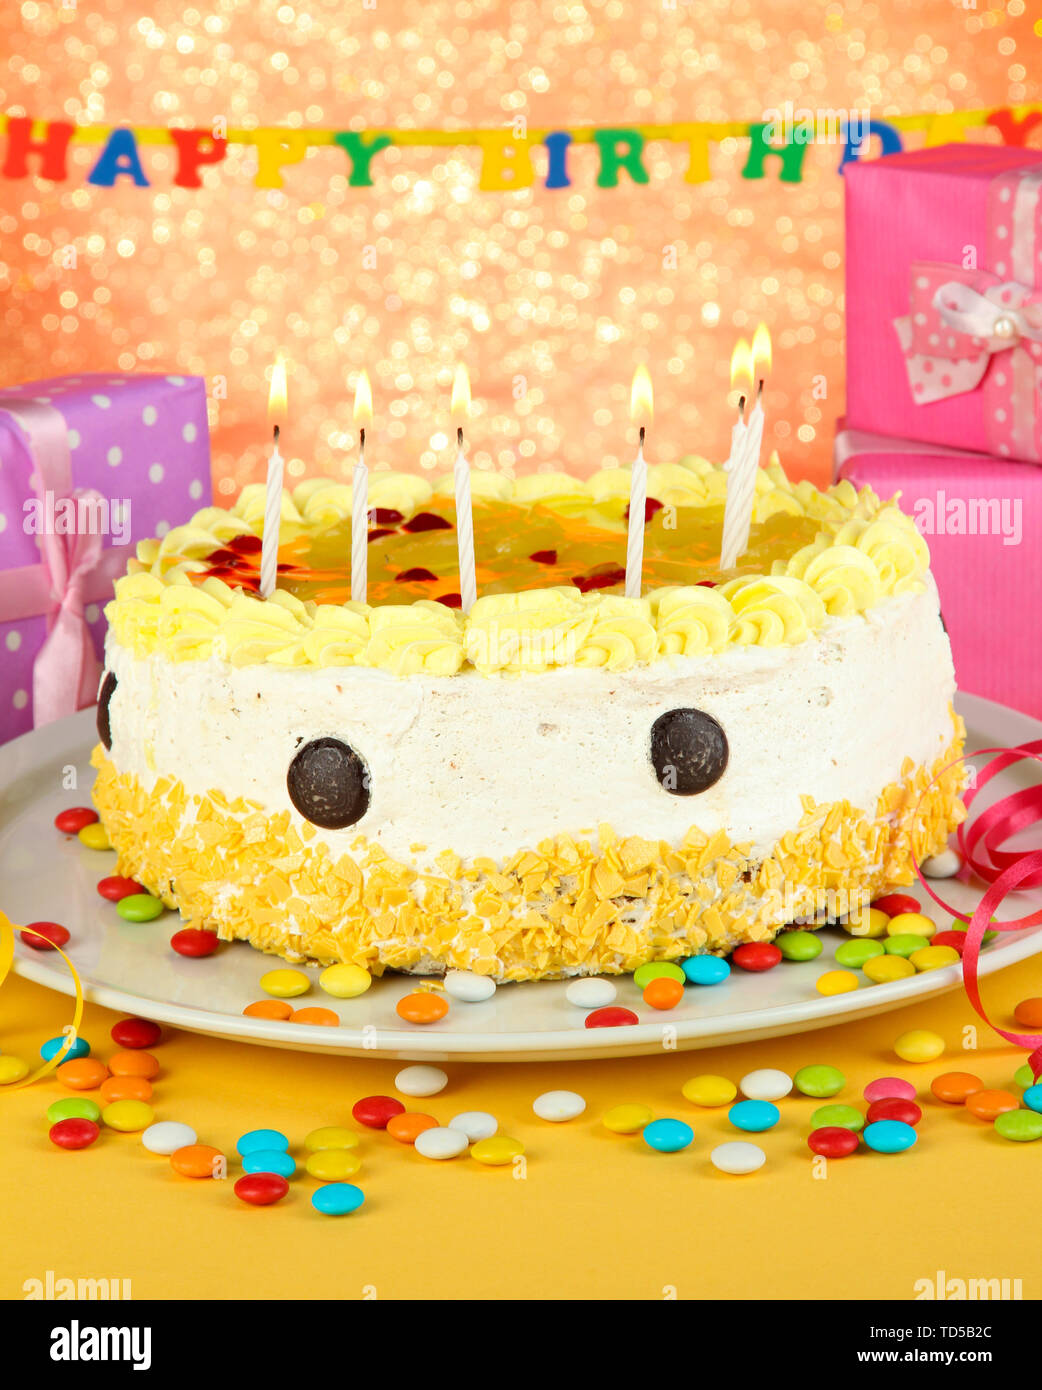 Happy birthday cake and gifts, on red background Stock Photo